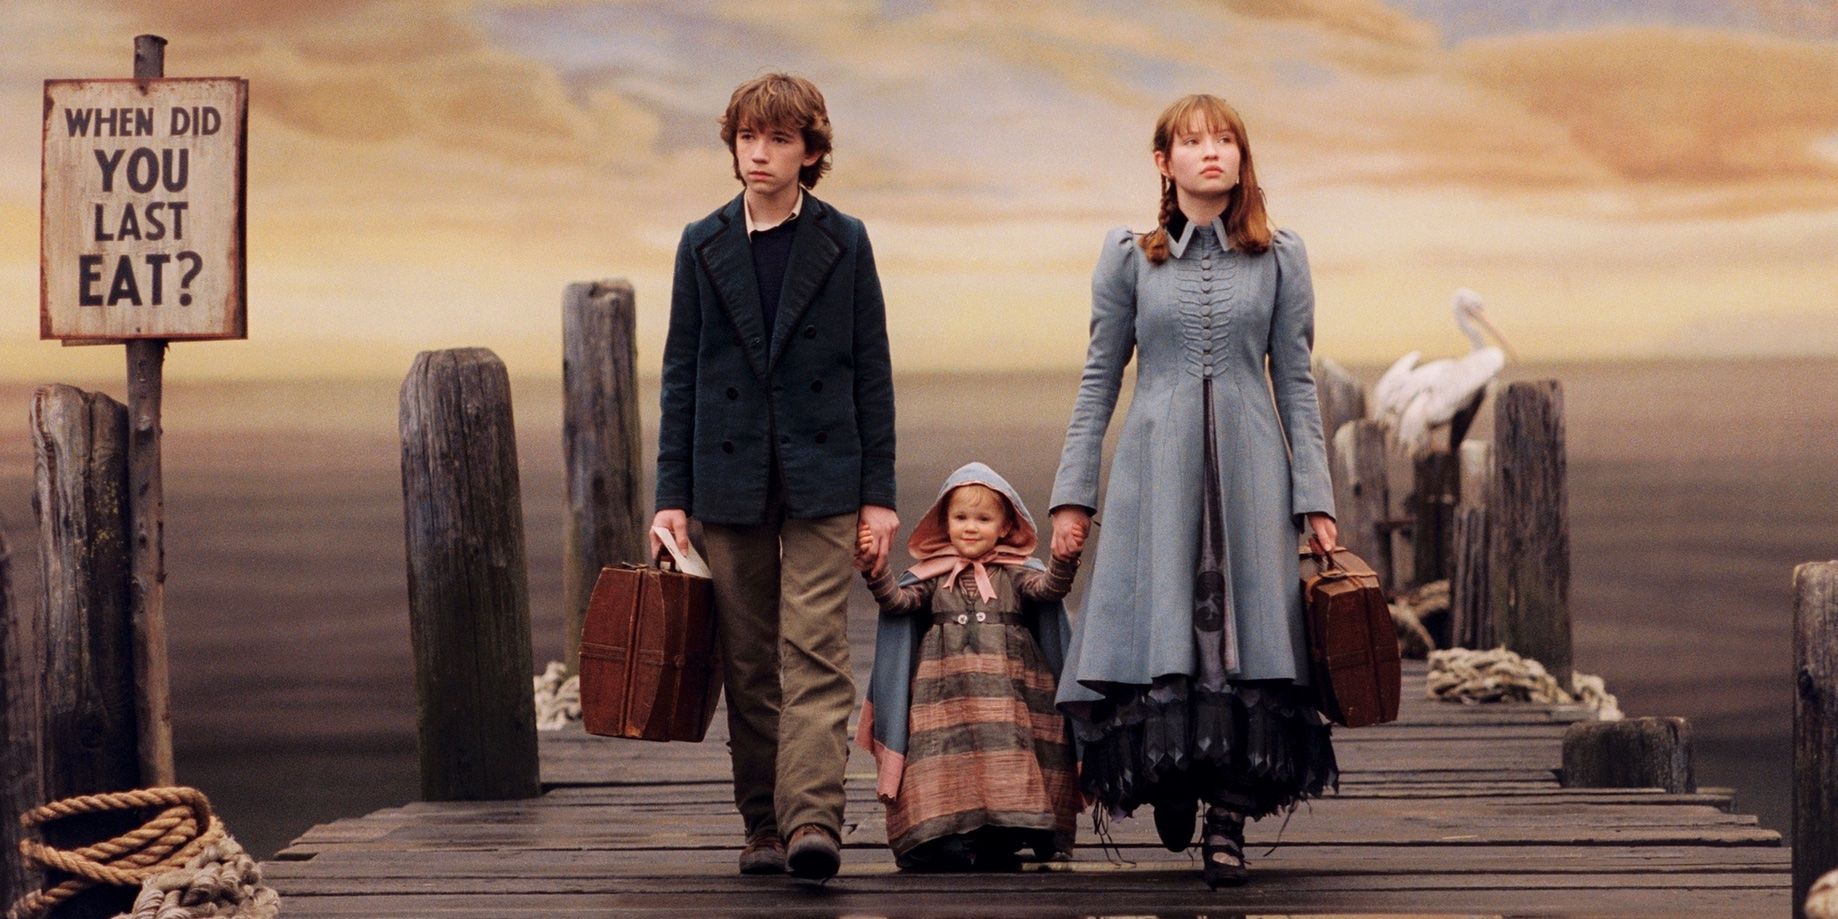 Liam Aiken, Emily Browning, Shelby Hoffman and Kara Hoffman in 'A Series of Unfortunate Events'